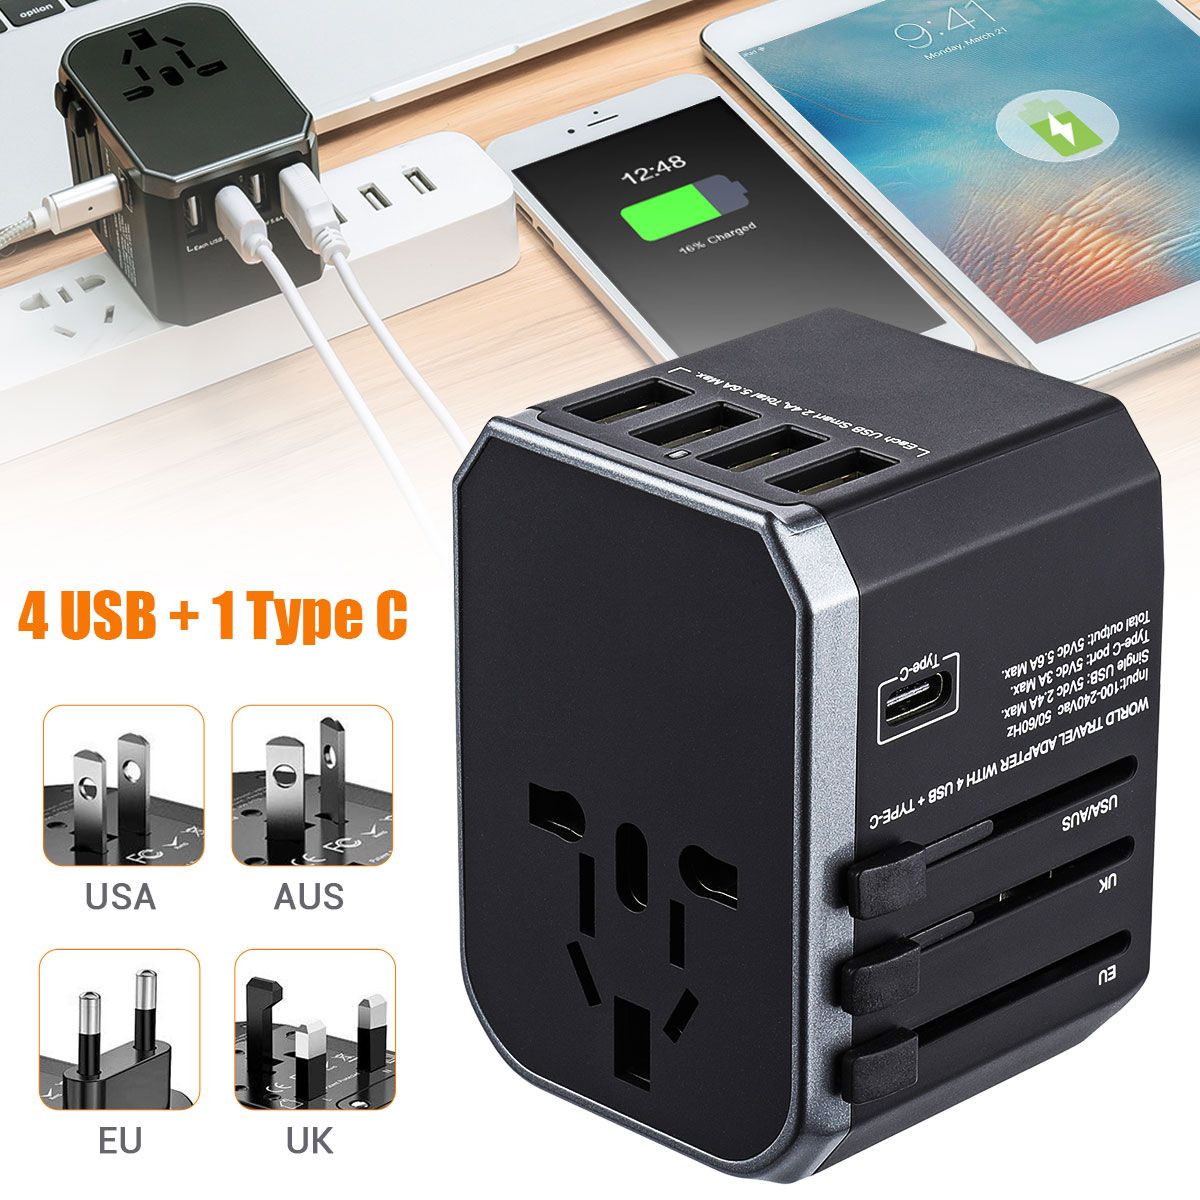 Bakeey-4-USB-PD-Type-C-Travel-Wall-USB-Charger-Adapater-EU-UK-US-AU-For-Phone-Tablet-Camera-1359649